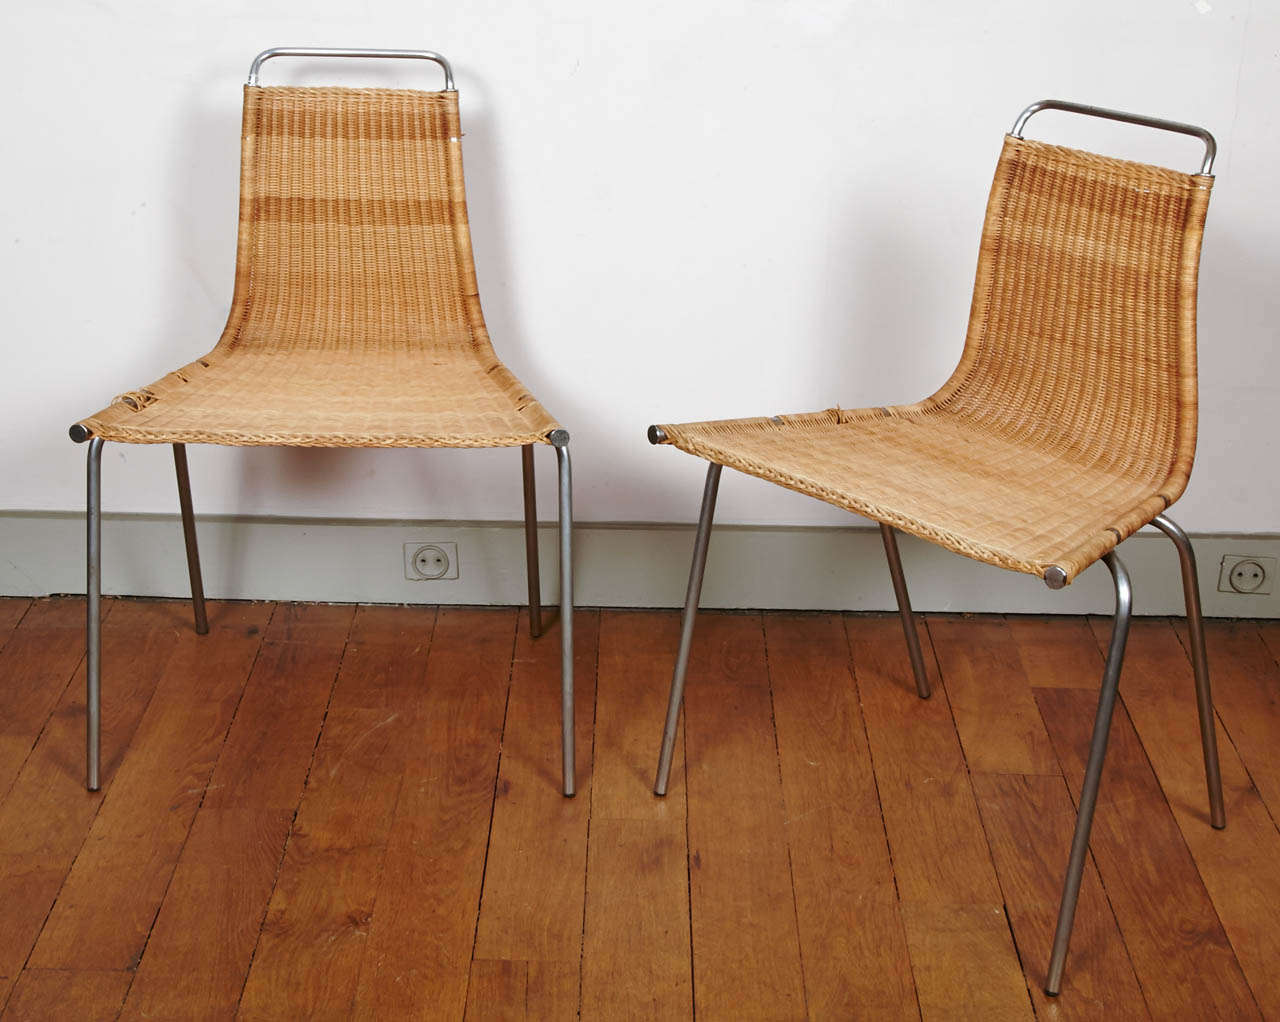 Four lovely and famous PK1 chairs, vintage good global condition